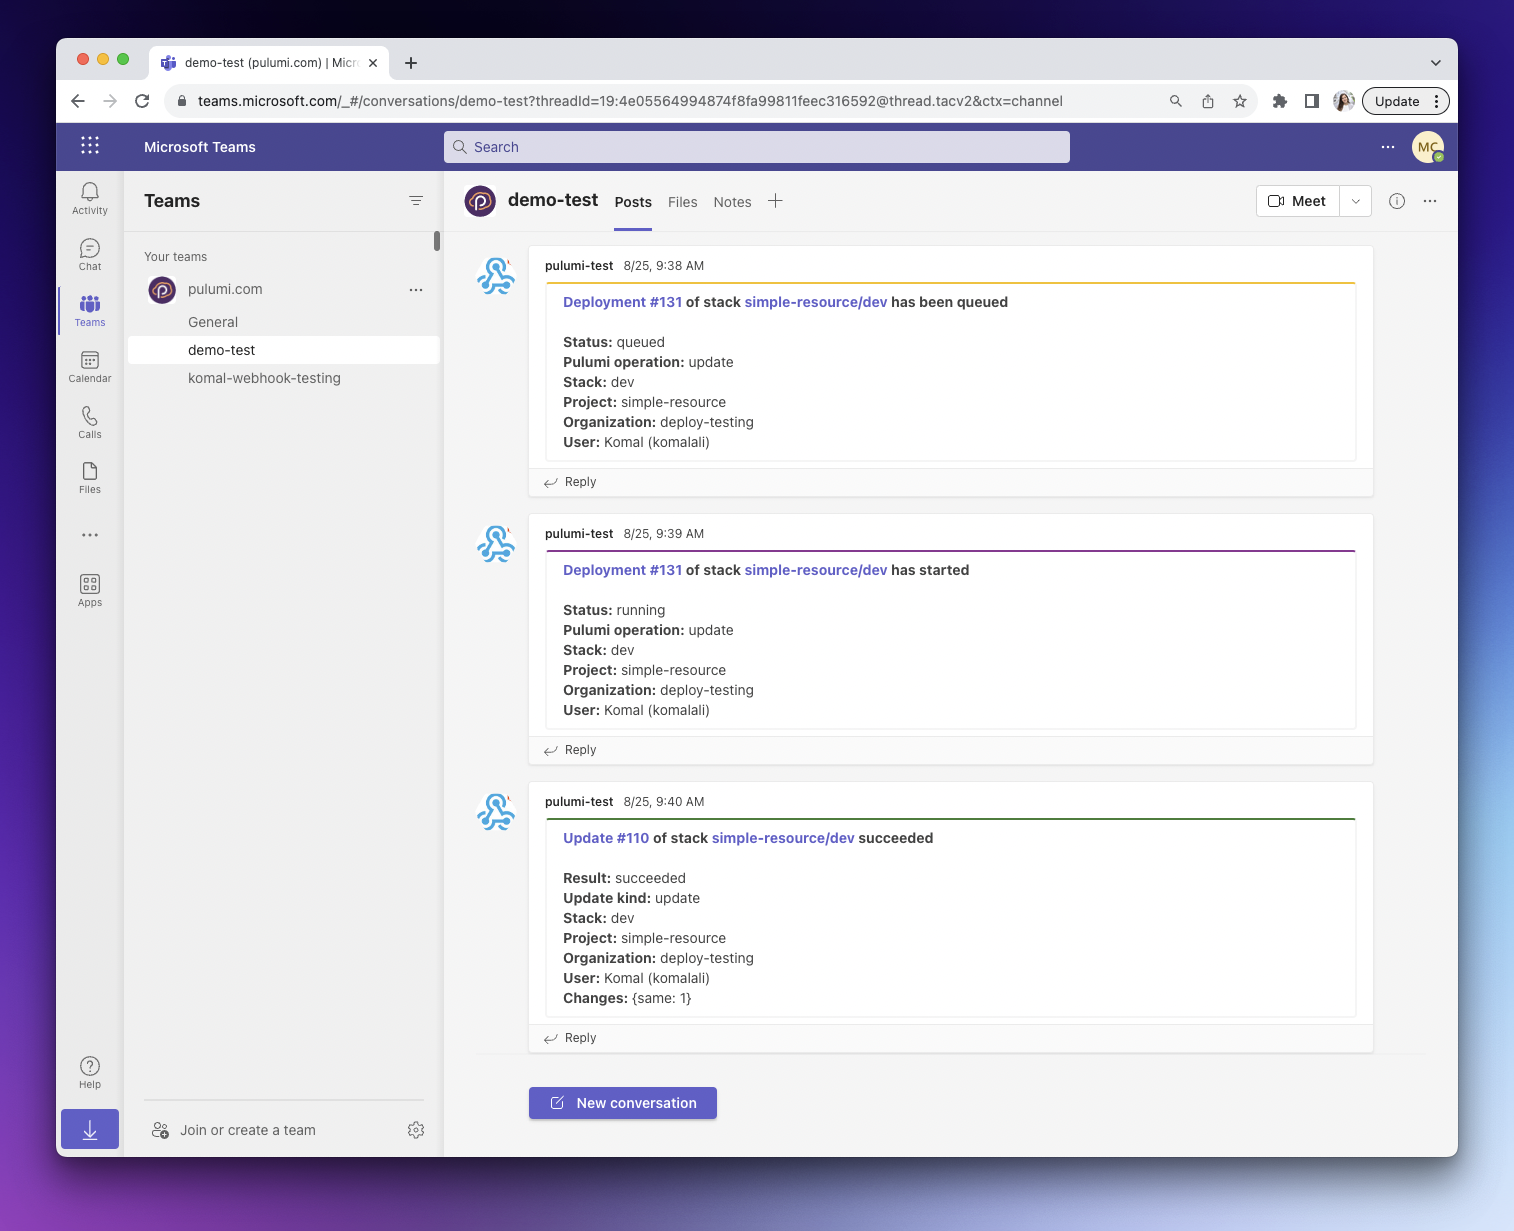 Example of the notifications in Microsoft Teams